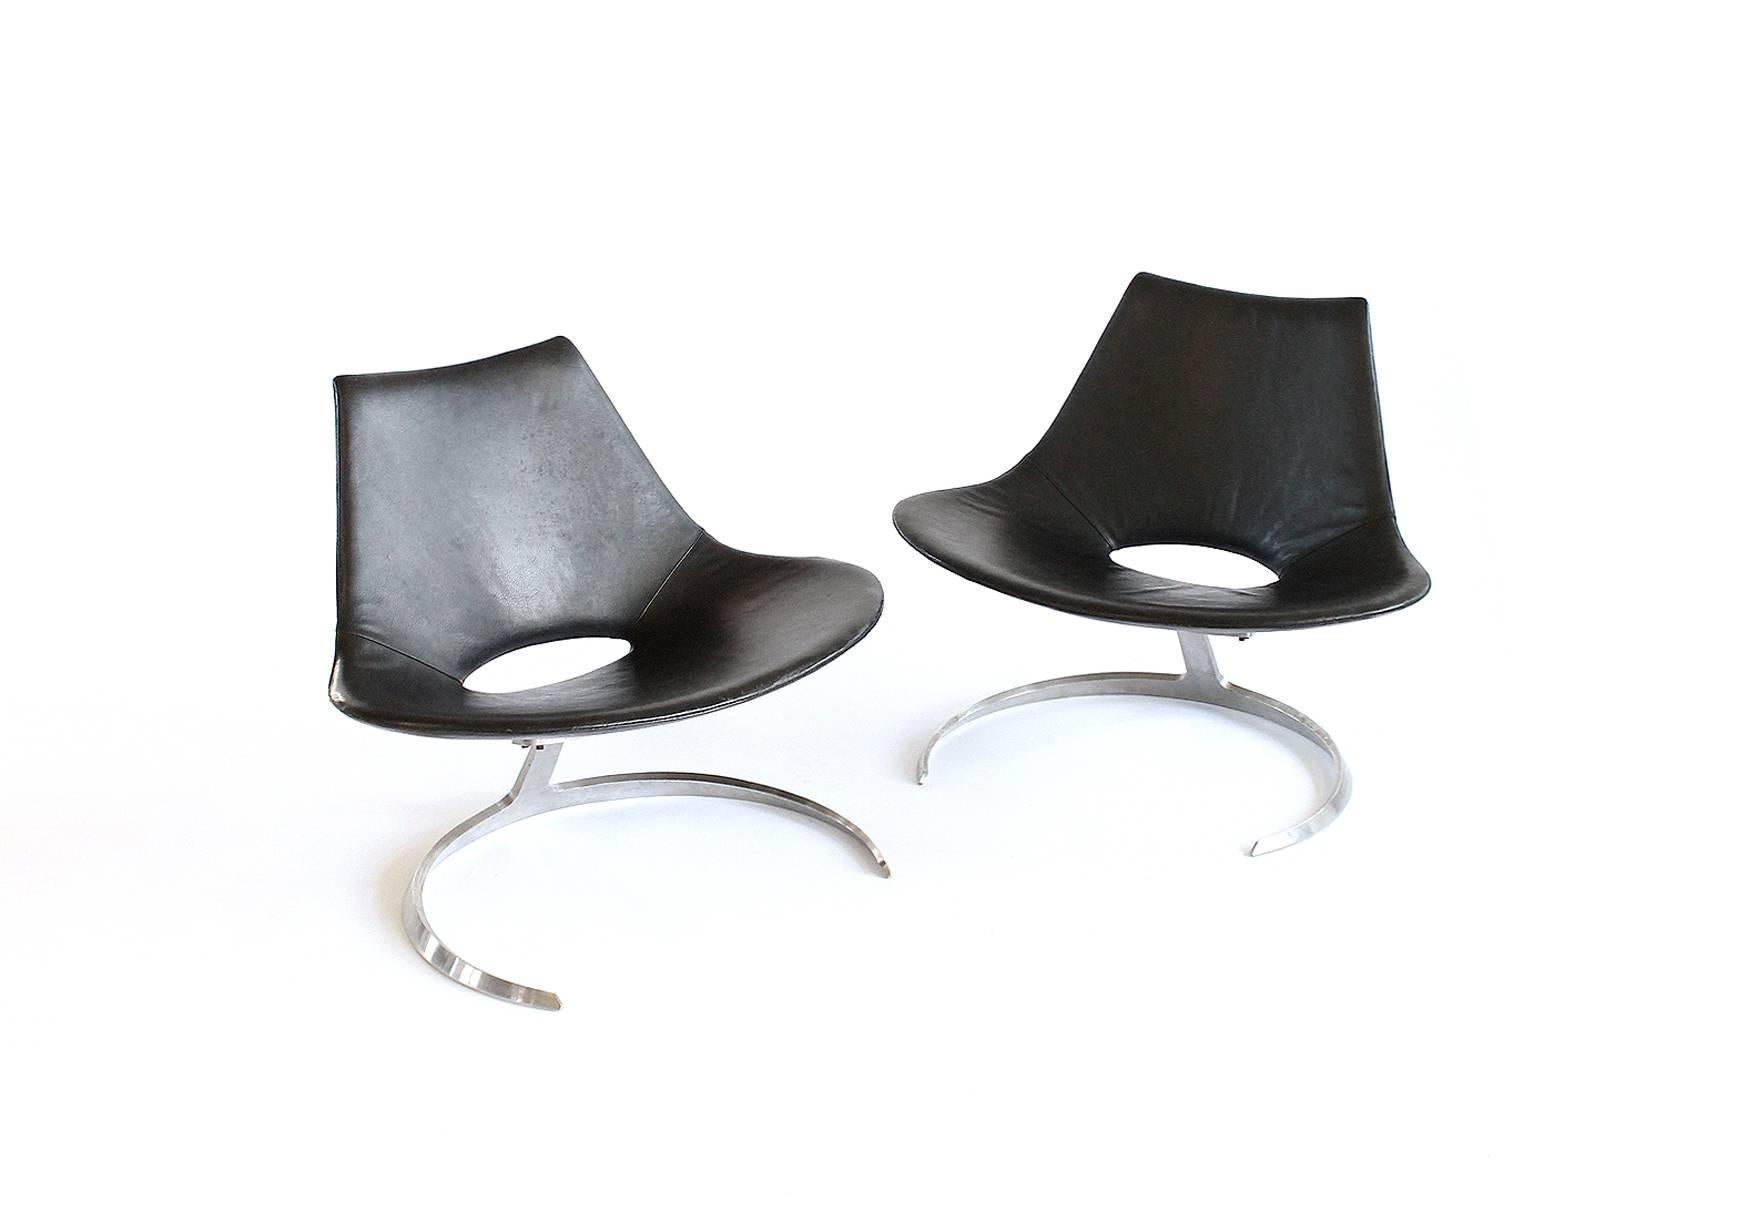 Beautiful and rare pair Preben Fabricius & Jørgen Kastholm 'Scimitar' lounge chairs with stainless steel frames and original black leather upholstery. Designed in 1962 with inspiration from a Turkish scimitar. Produced and stamped by Ivan